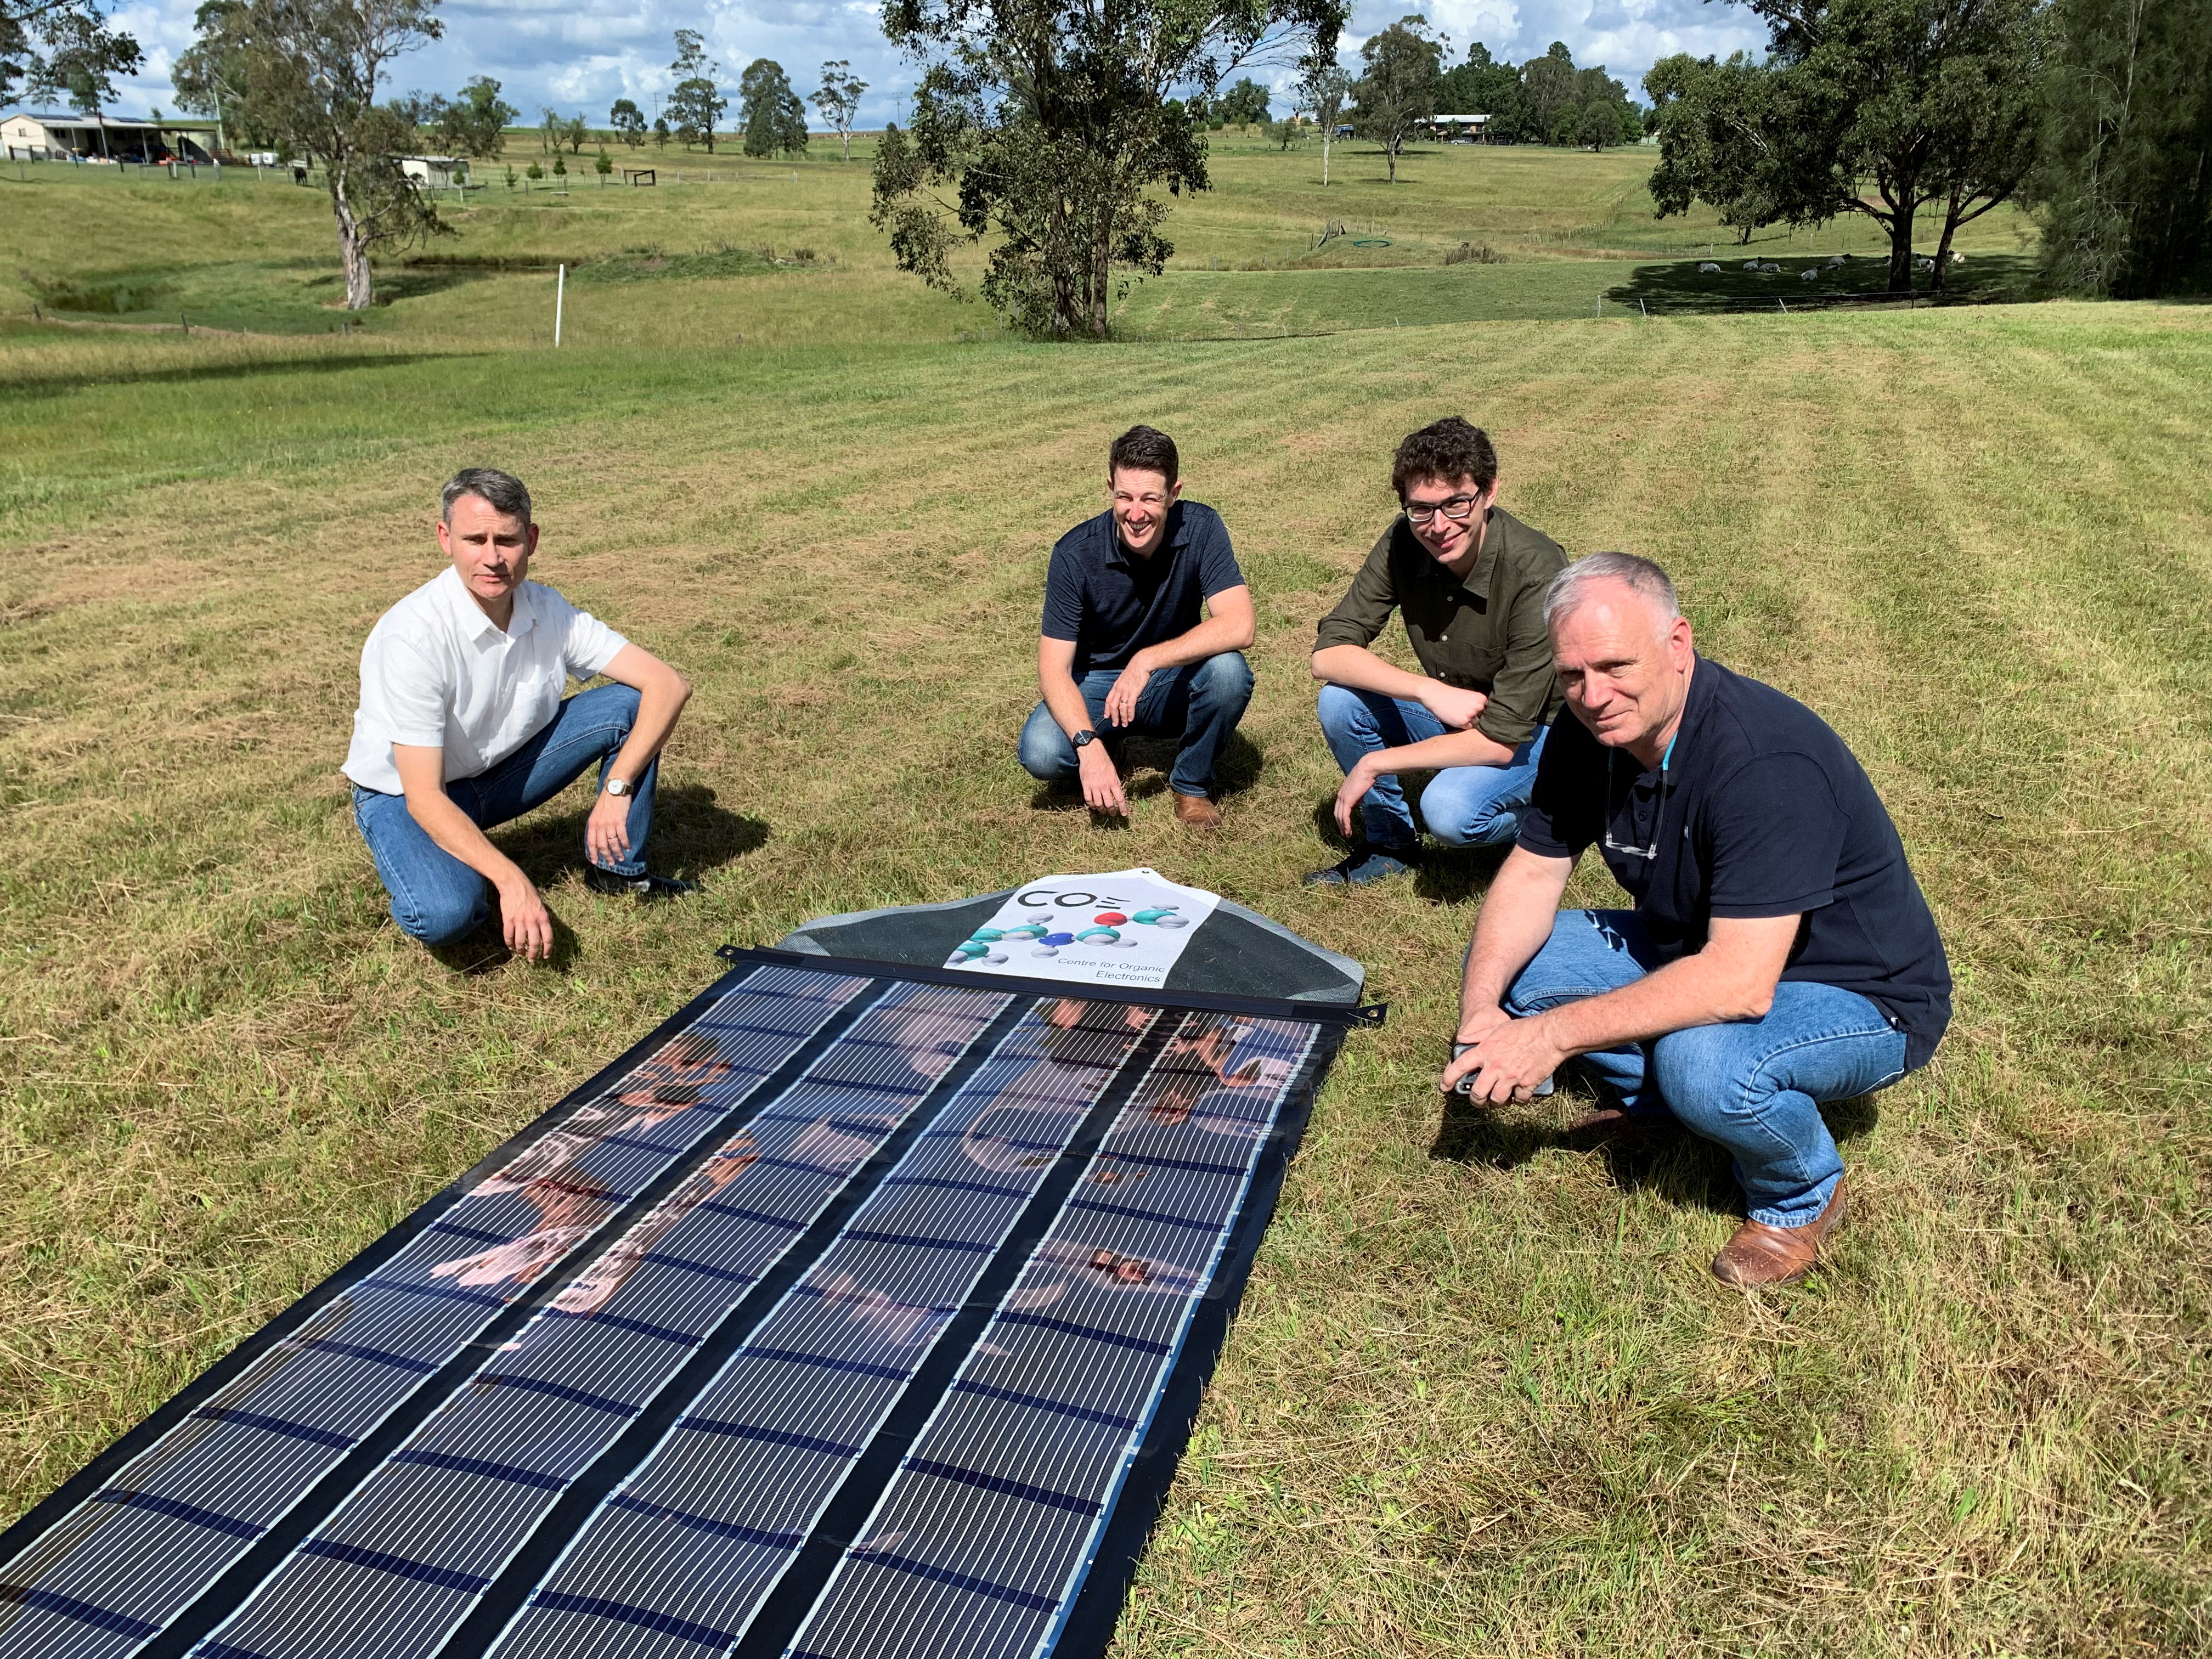 Charge Around Australia project lead and inventor of 'printed solar' panels Paul Dastoor and team members next to a printed solar panel, in Gosforth